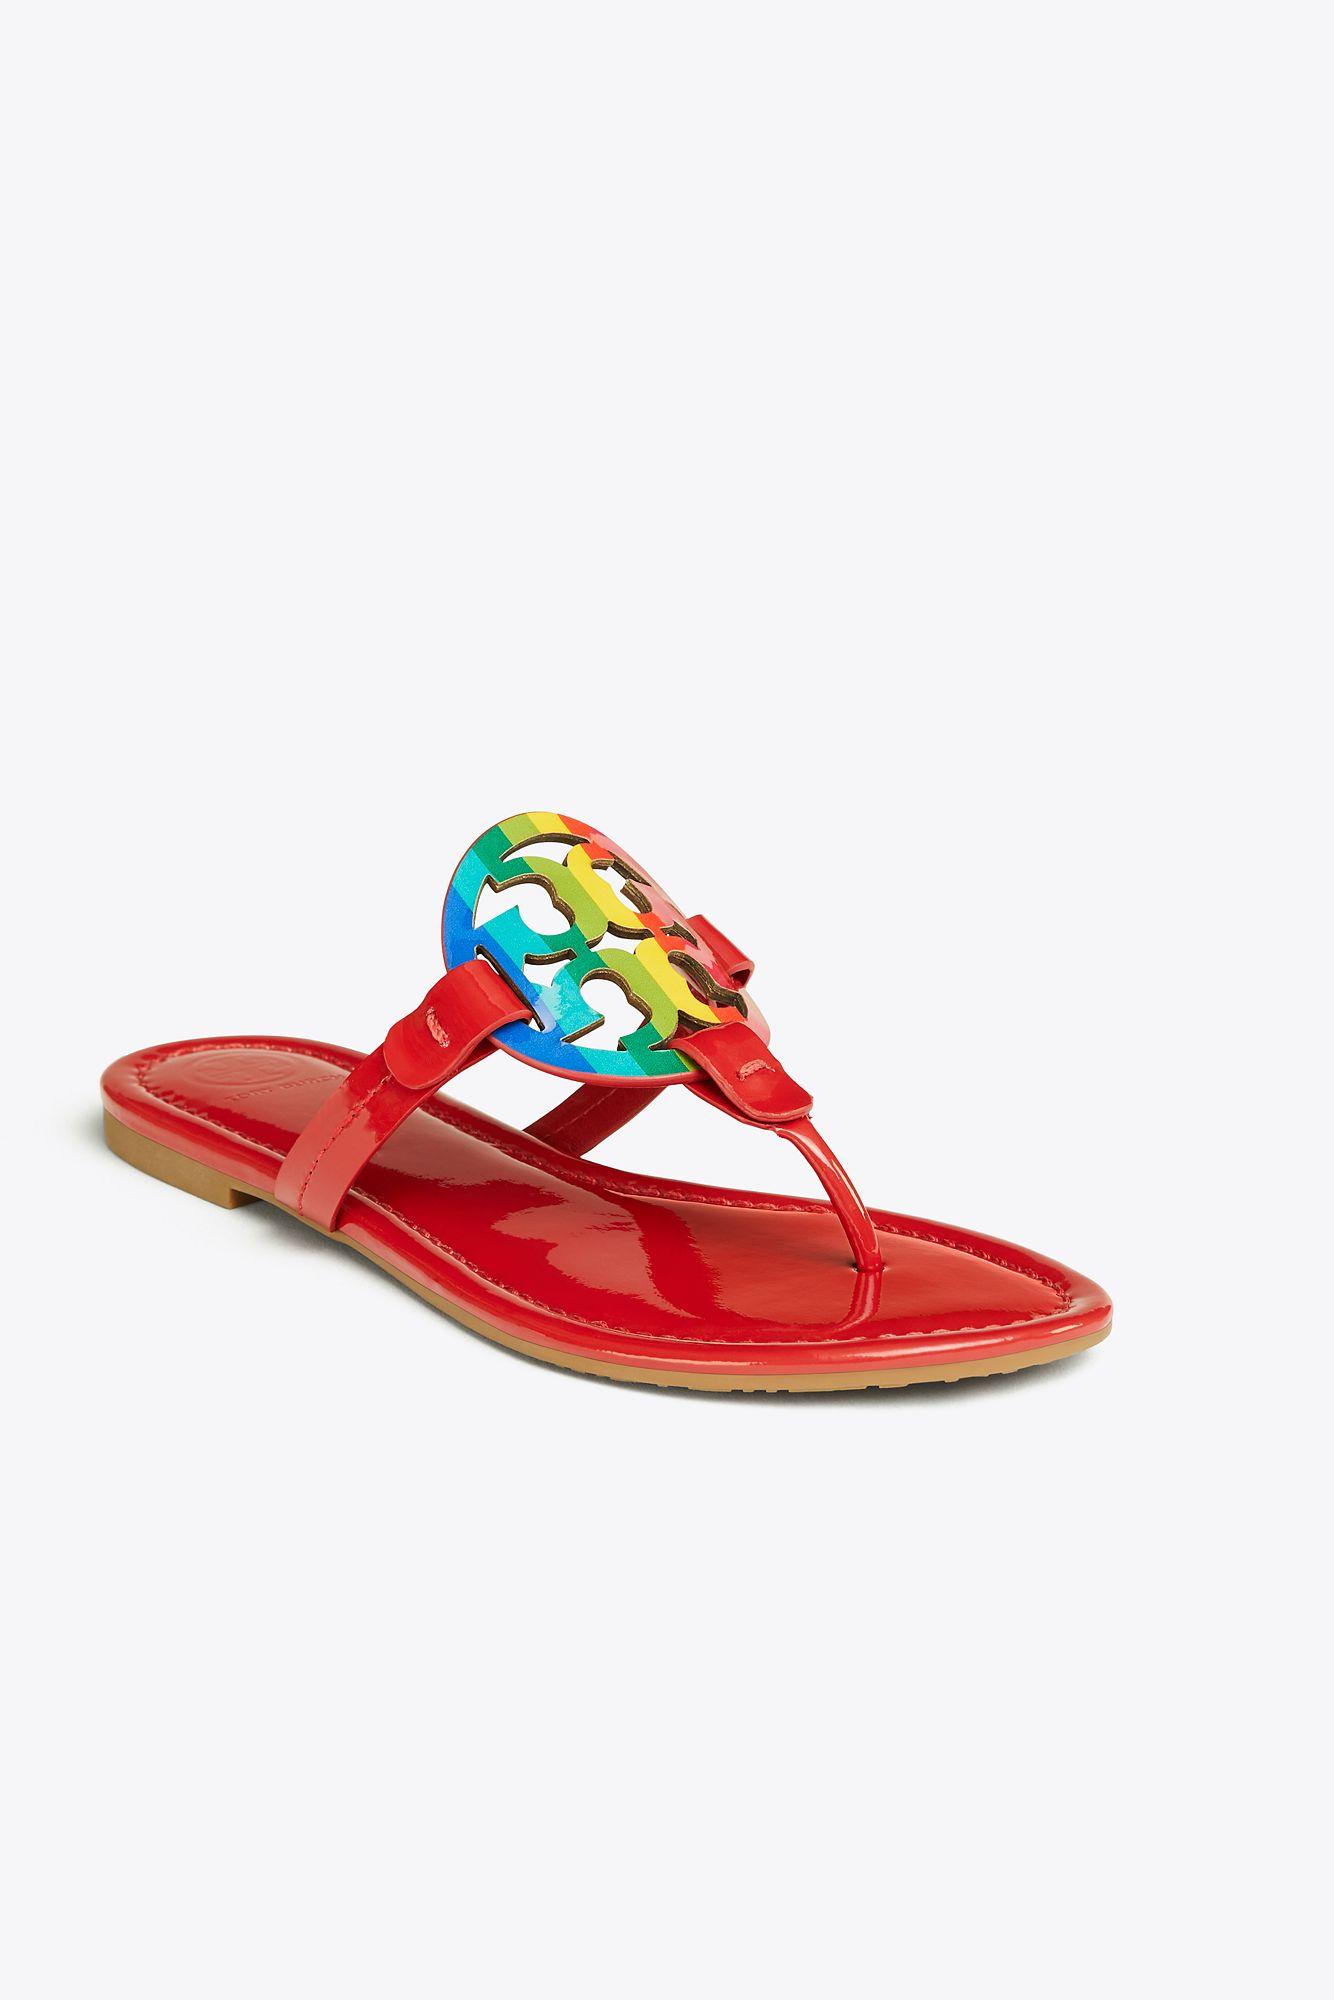 Tory Burch Miller Sandals, Printed Patent Leather in Bright Rainbow ...